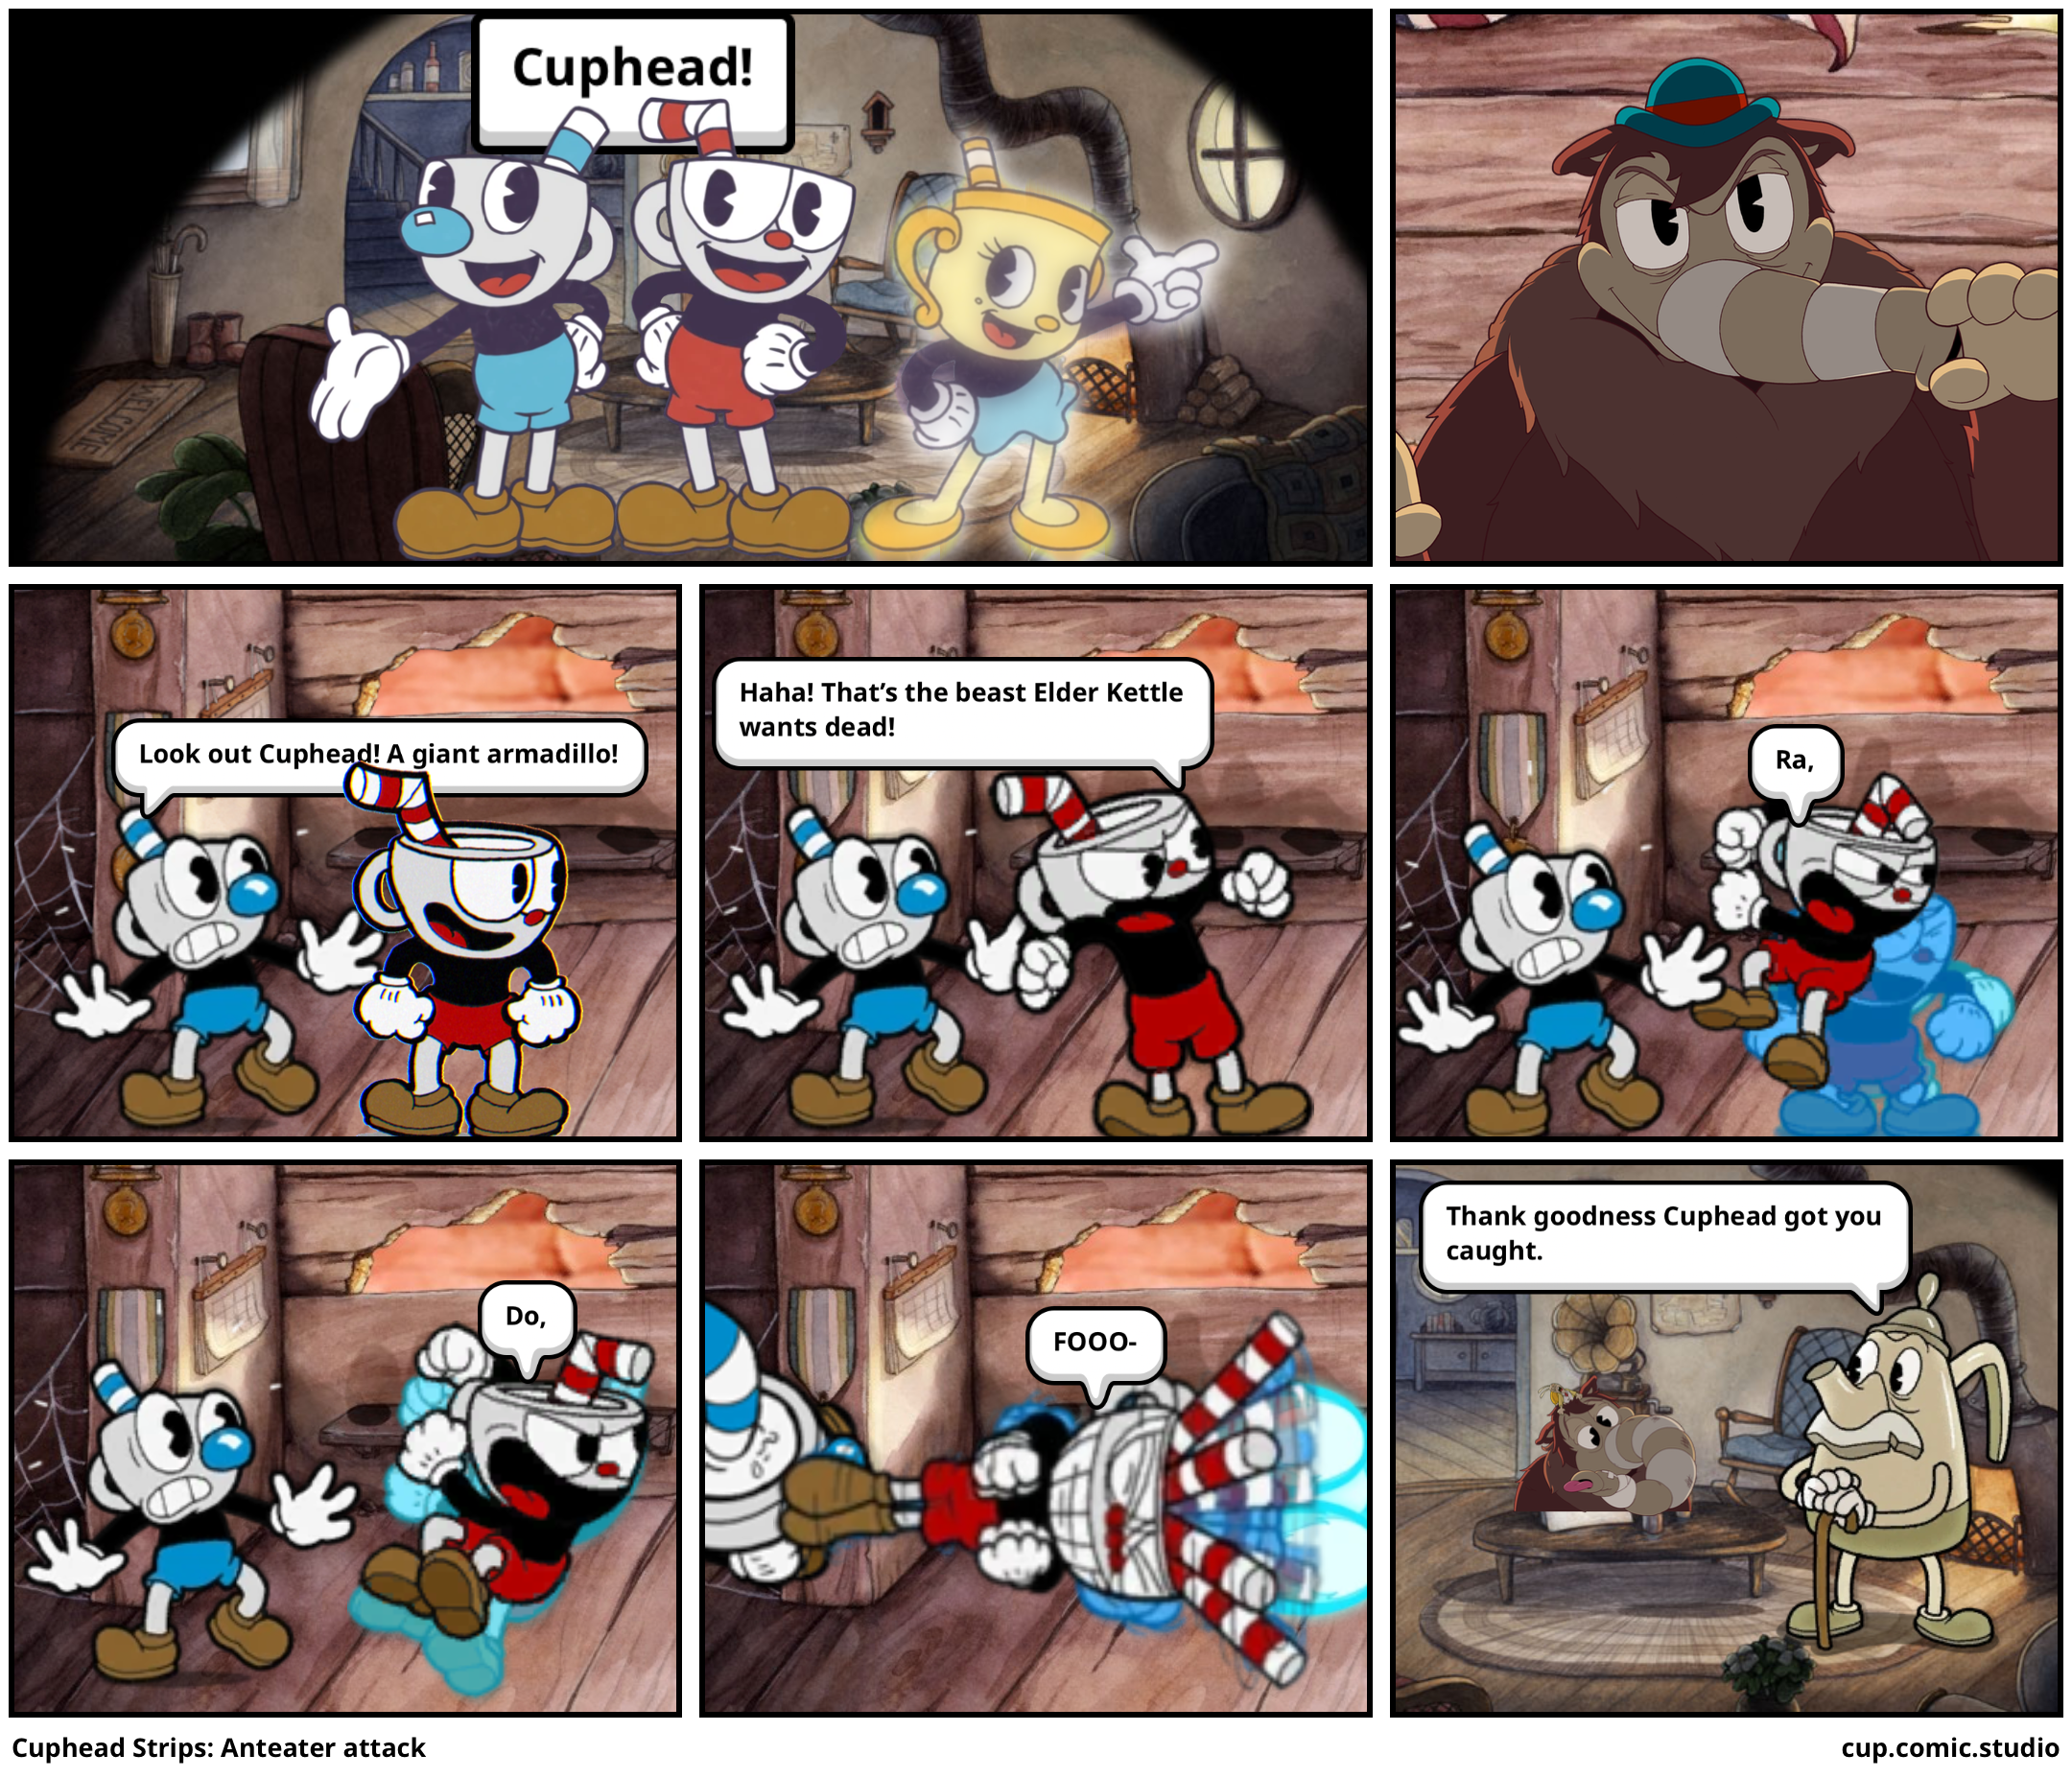 Cuphead Strips: Anteater attack